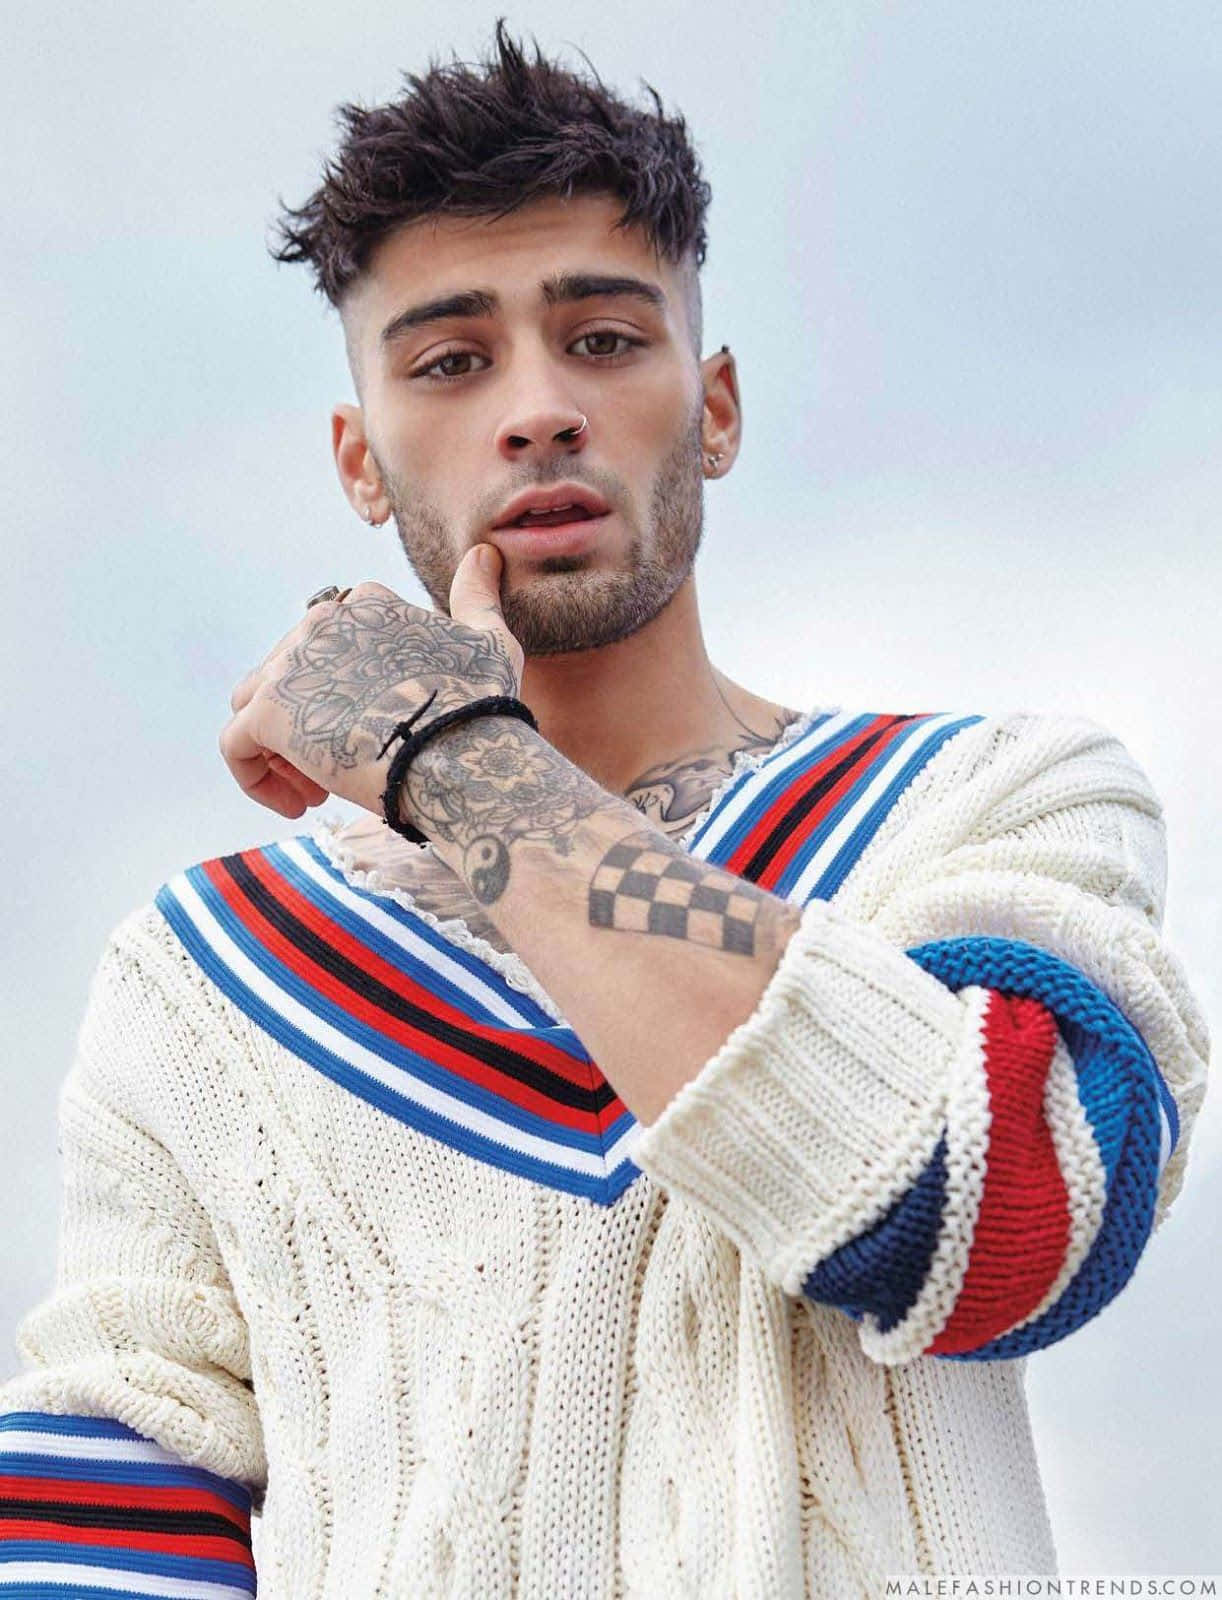 A Man With Tattoos And A Sweater